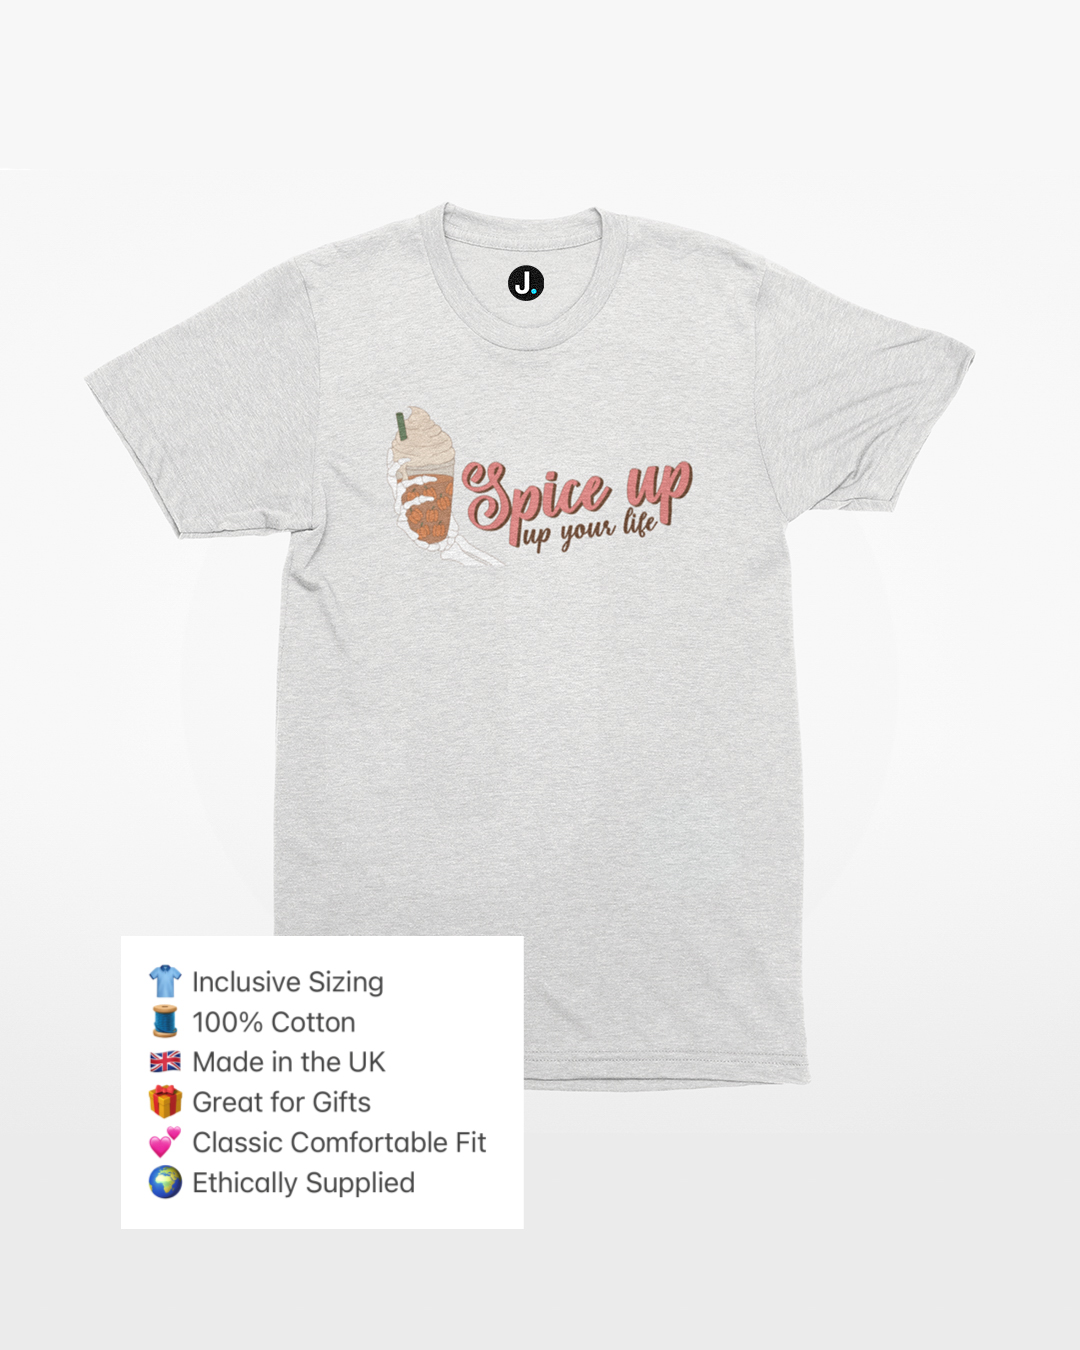 Spice Up Your Life Pumpkin Spiced Latte T-Shirt - Spice Up Your Life T-Shirt - Spooky Season Skeleton's Hand Pumpkin Spiced Latte T-Shirt - Halloween Pumpkin Spiced Latte T-Shirt